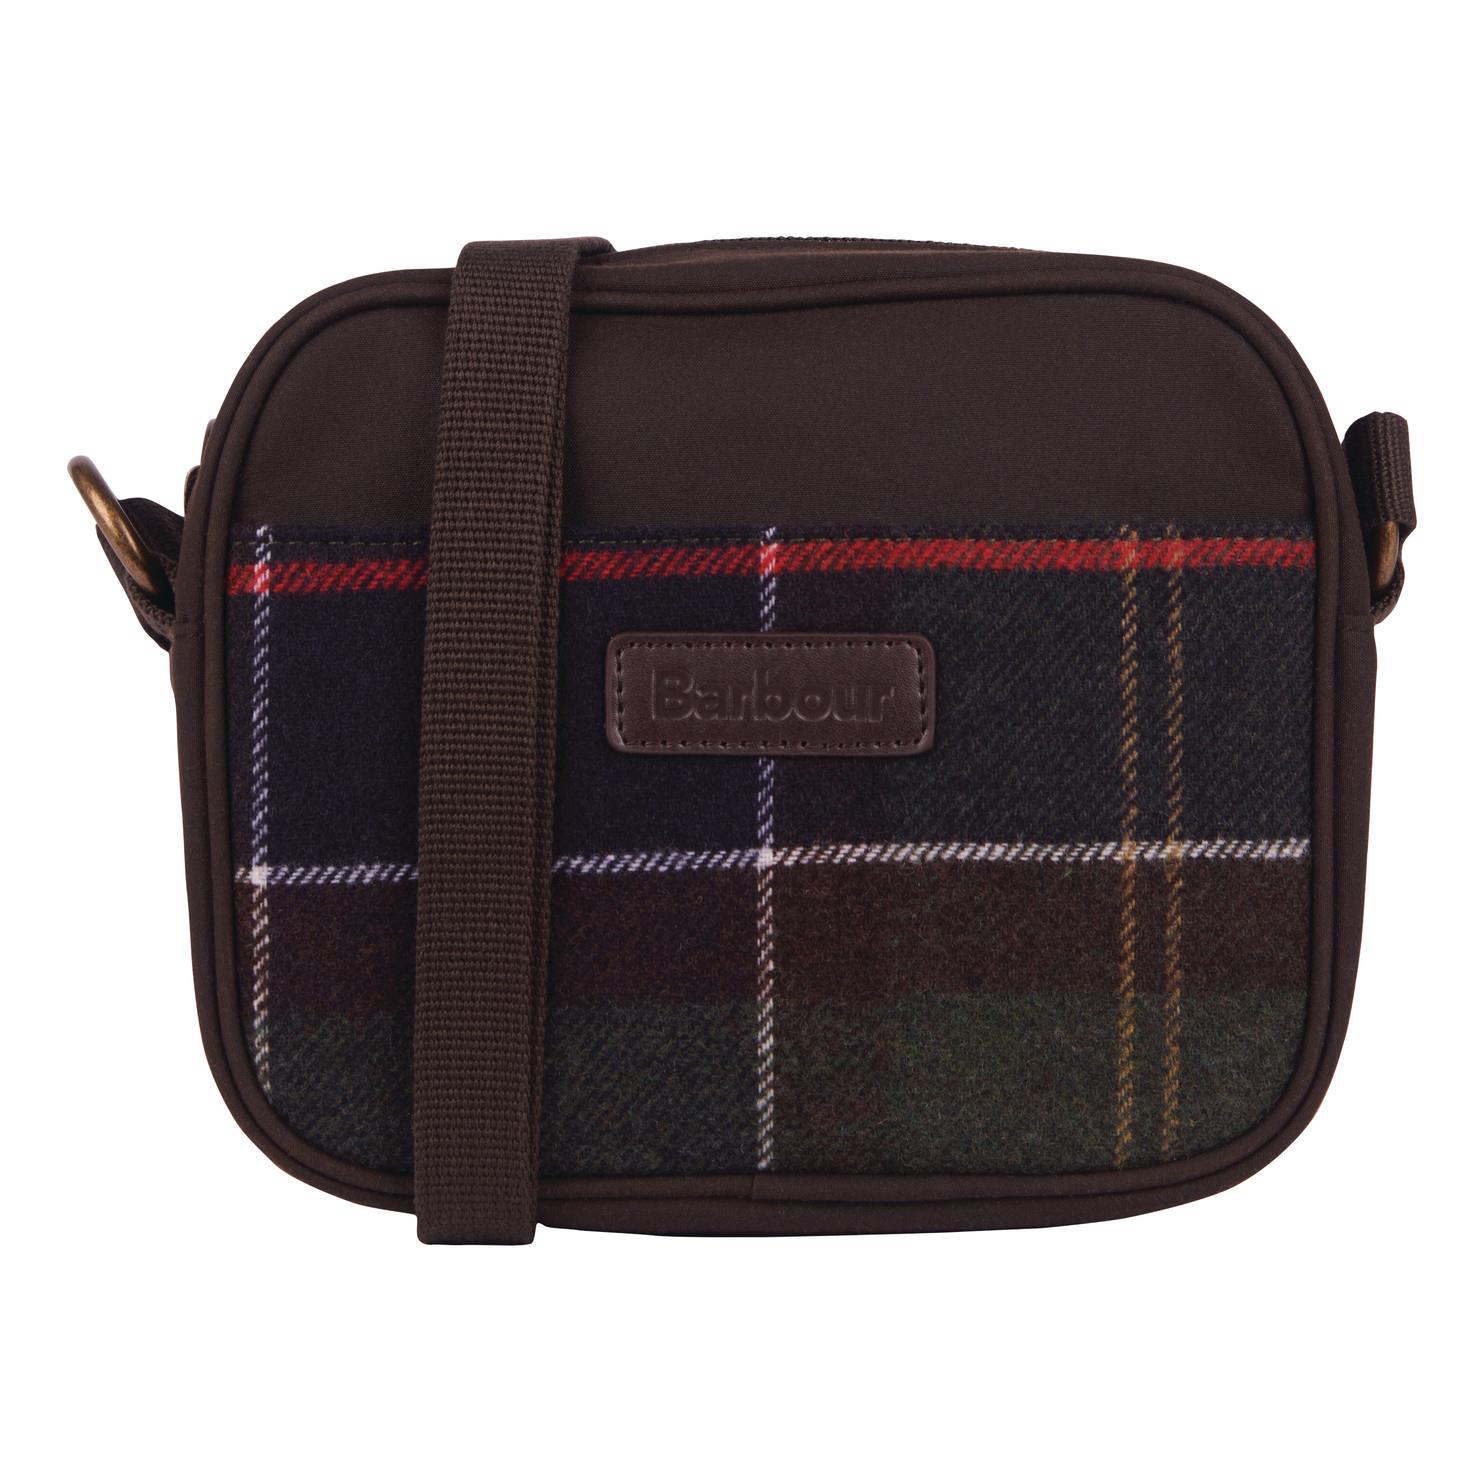 Can you provide the dimensions of the Barbour Womens Contin Cross Body Bag?